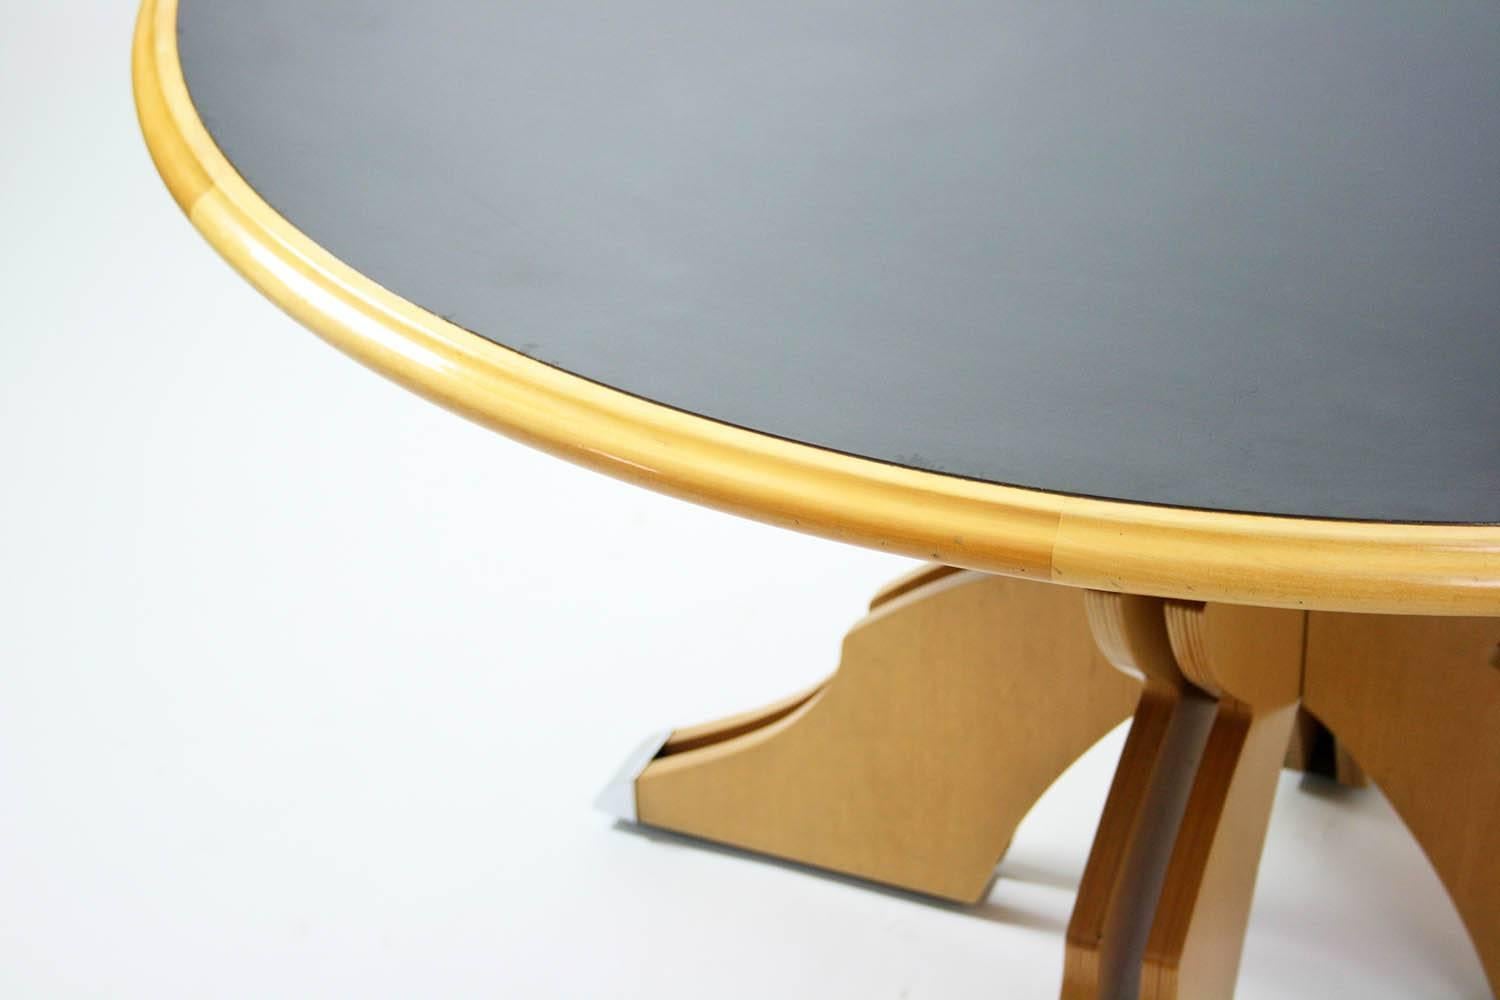 Robert Venturi Queen Anne dining table for Knoll International, USA, 1979-1984, featuring a leather top. Constructed of plywood, leather, rubber and chrome-plated brass.

Dimensions: 60" W x 29.5" H.